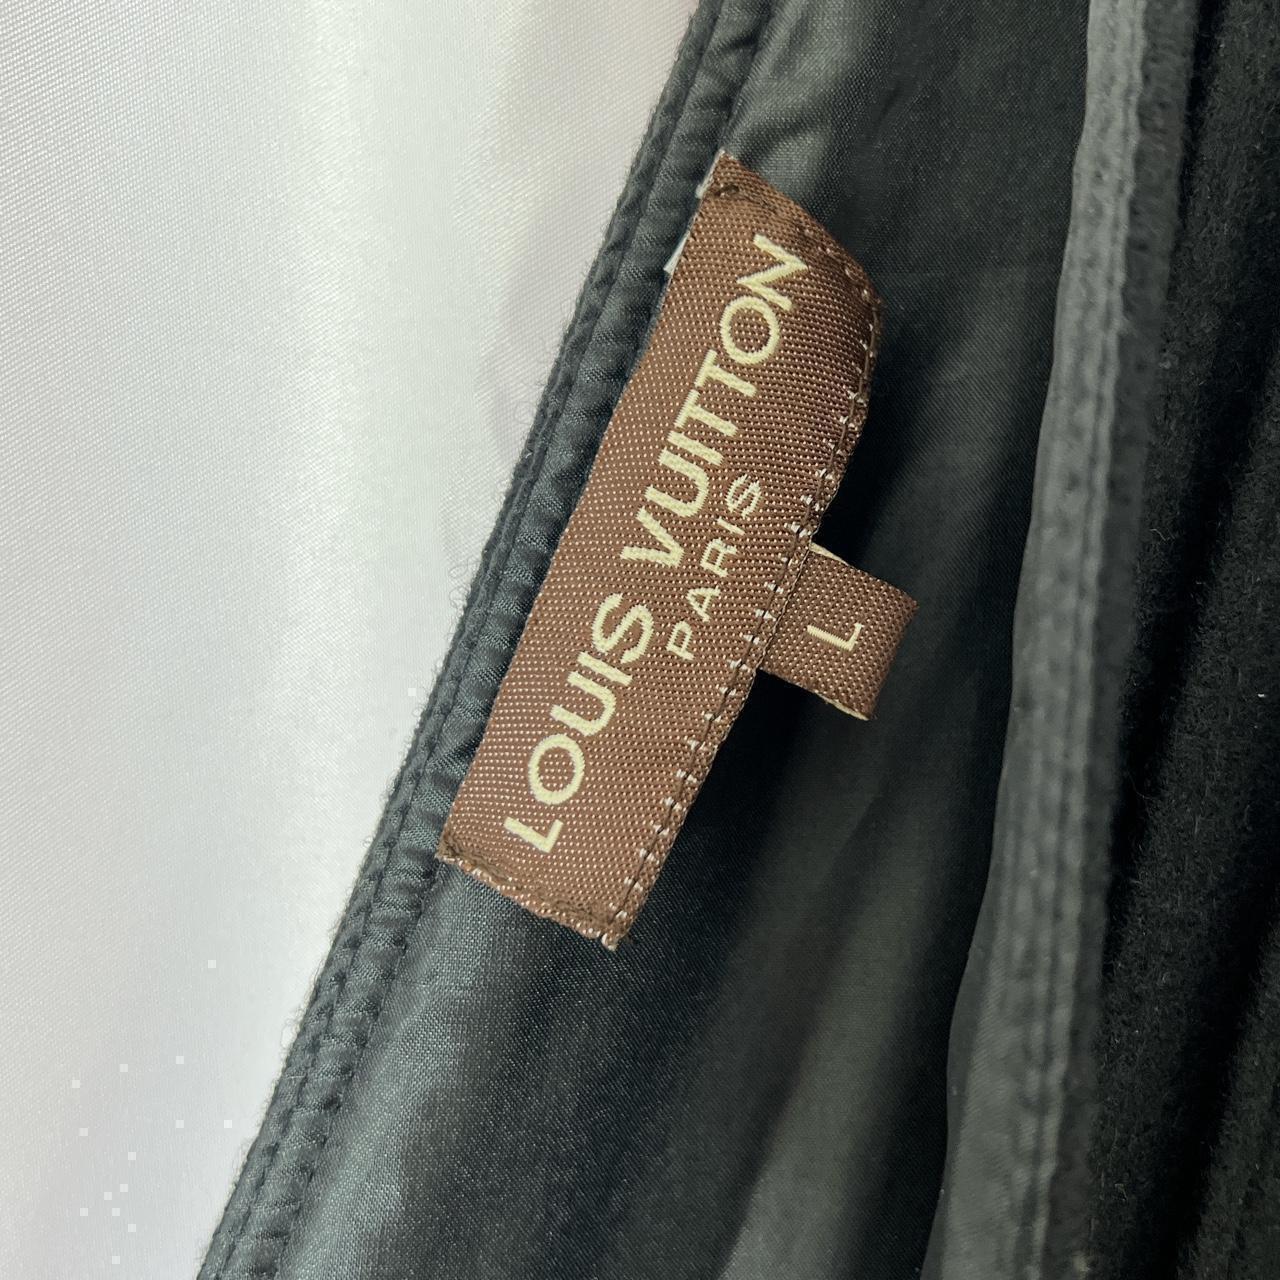 One of our favorite Y2K styles, the preloved Louis Vuitton “Judy